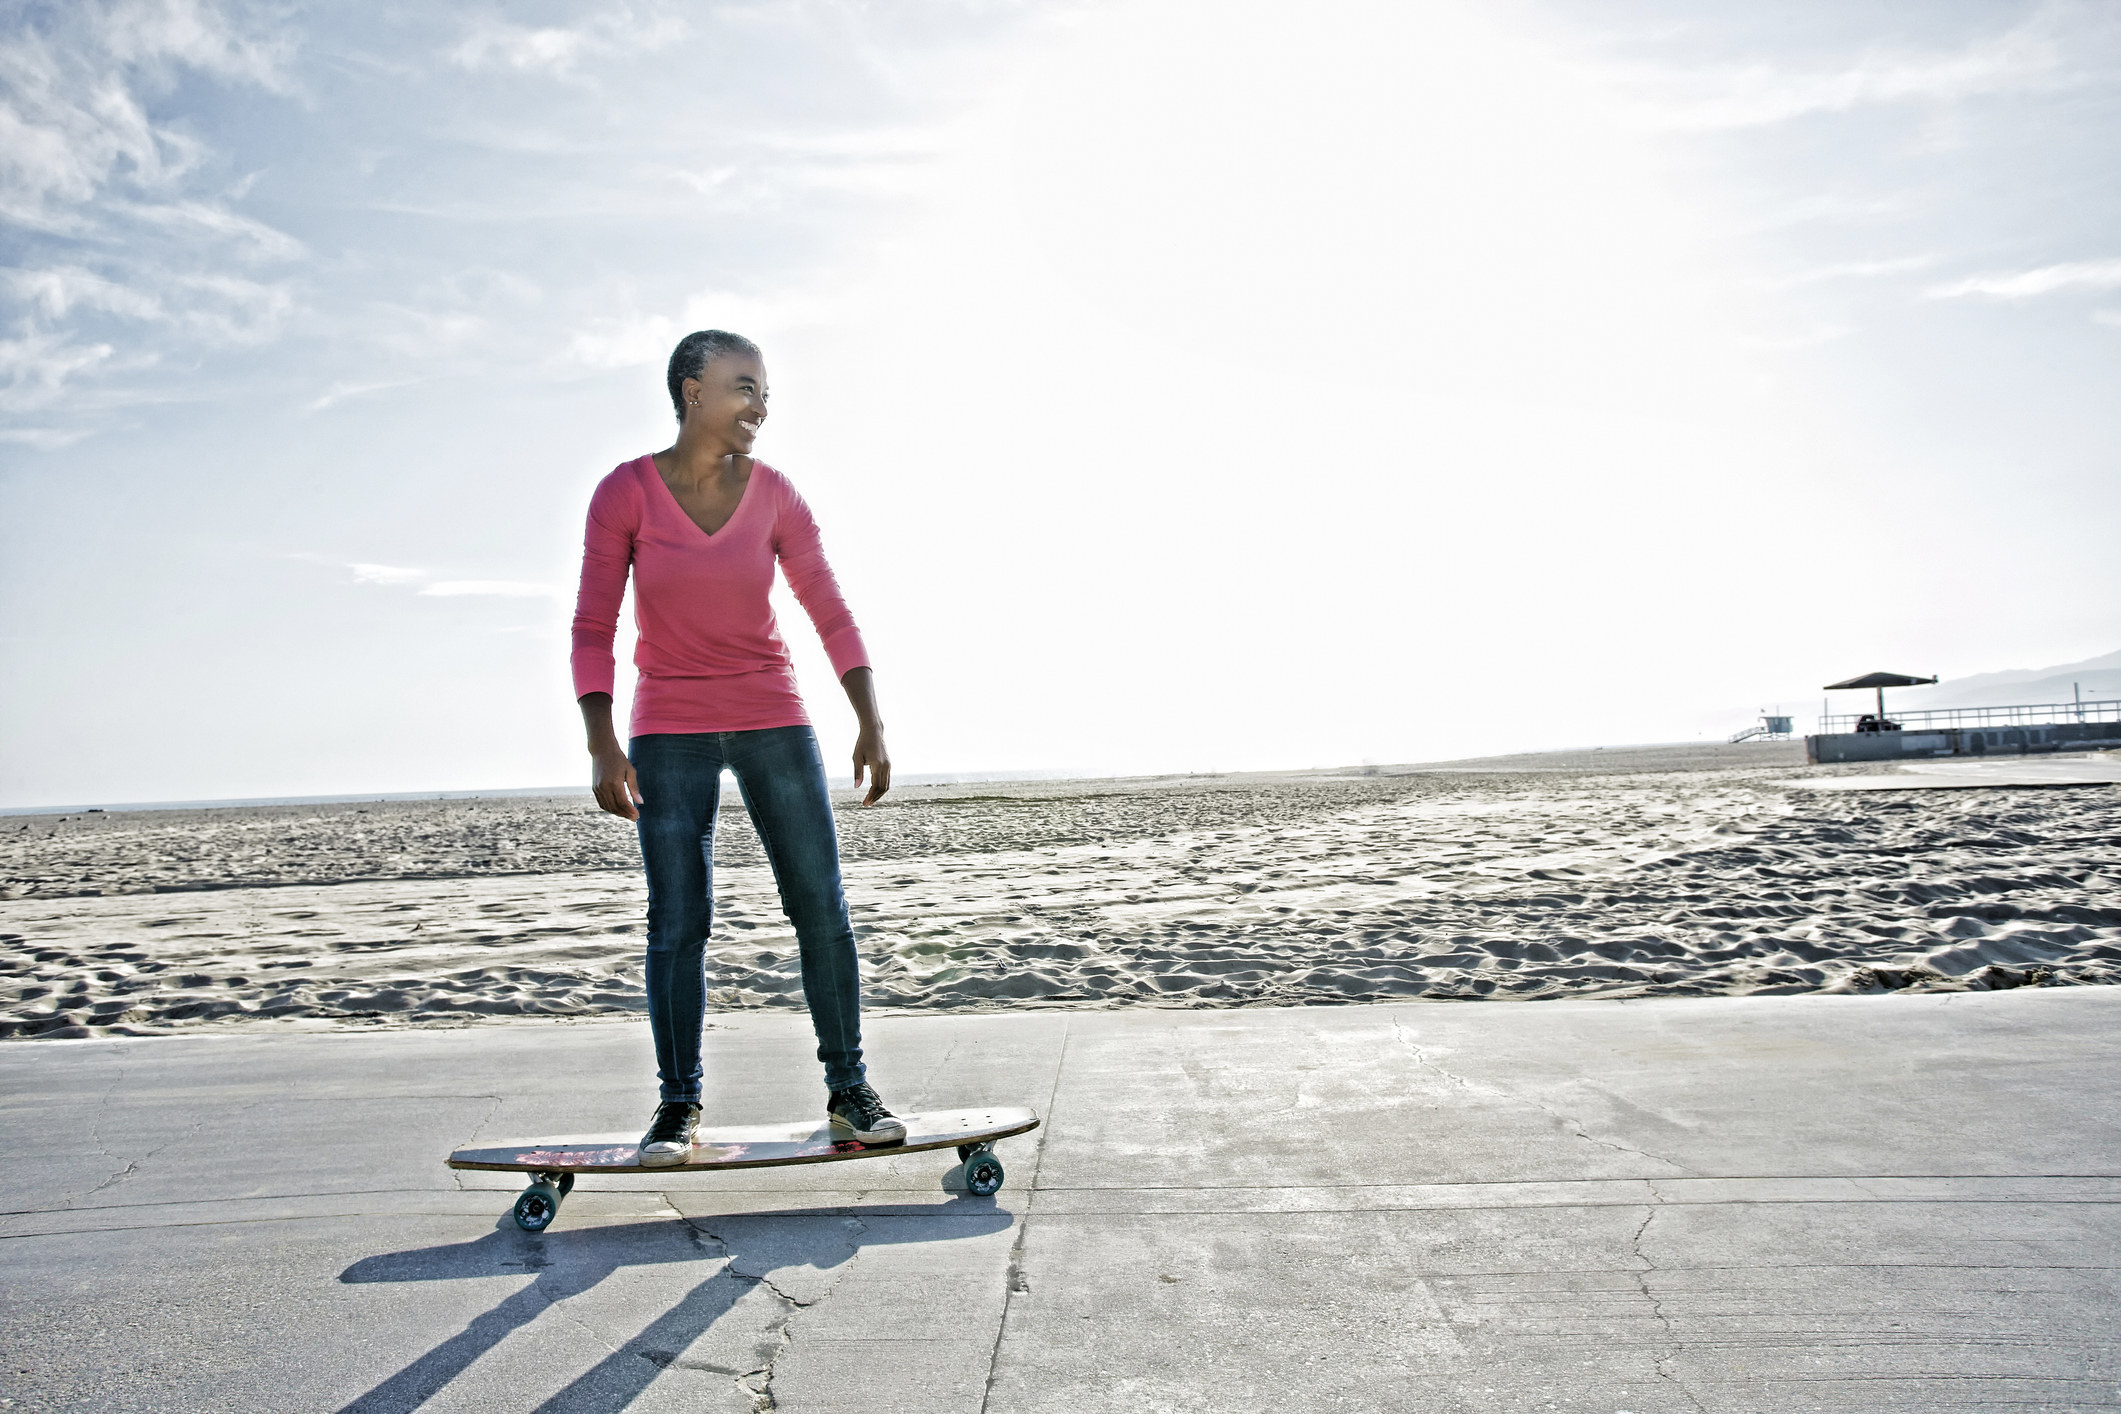 Smiling woman on a skateboard